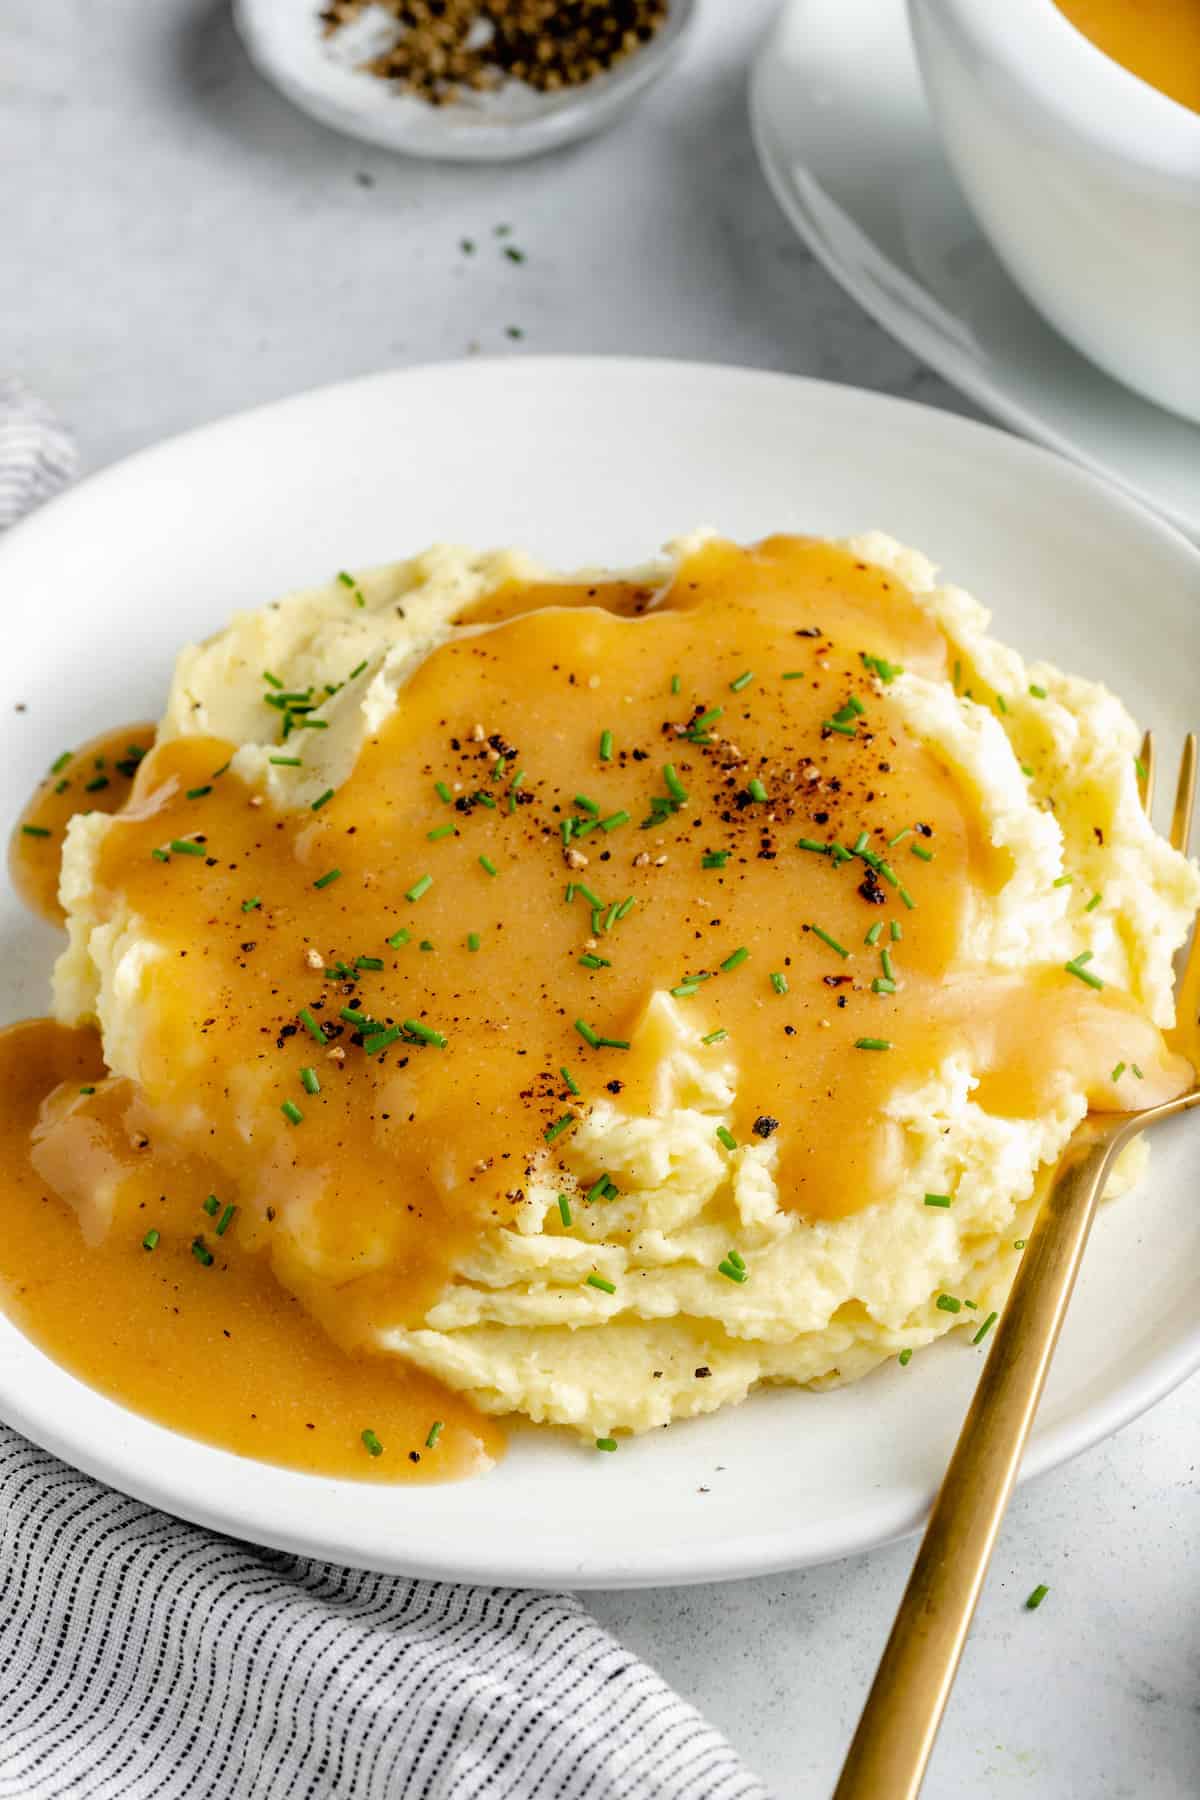 Mashed potatoes on white plate, covered with gravy and topped with minced herbs